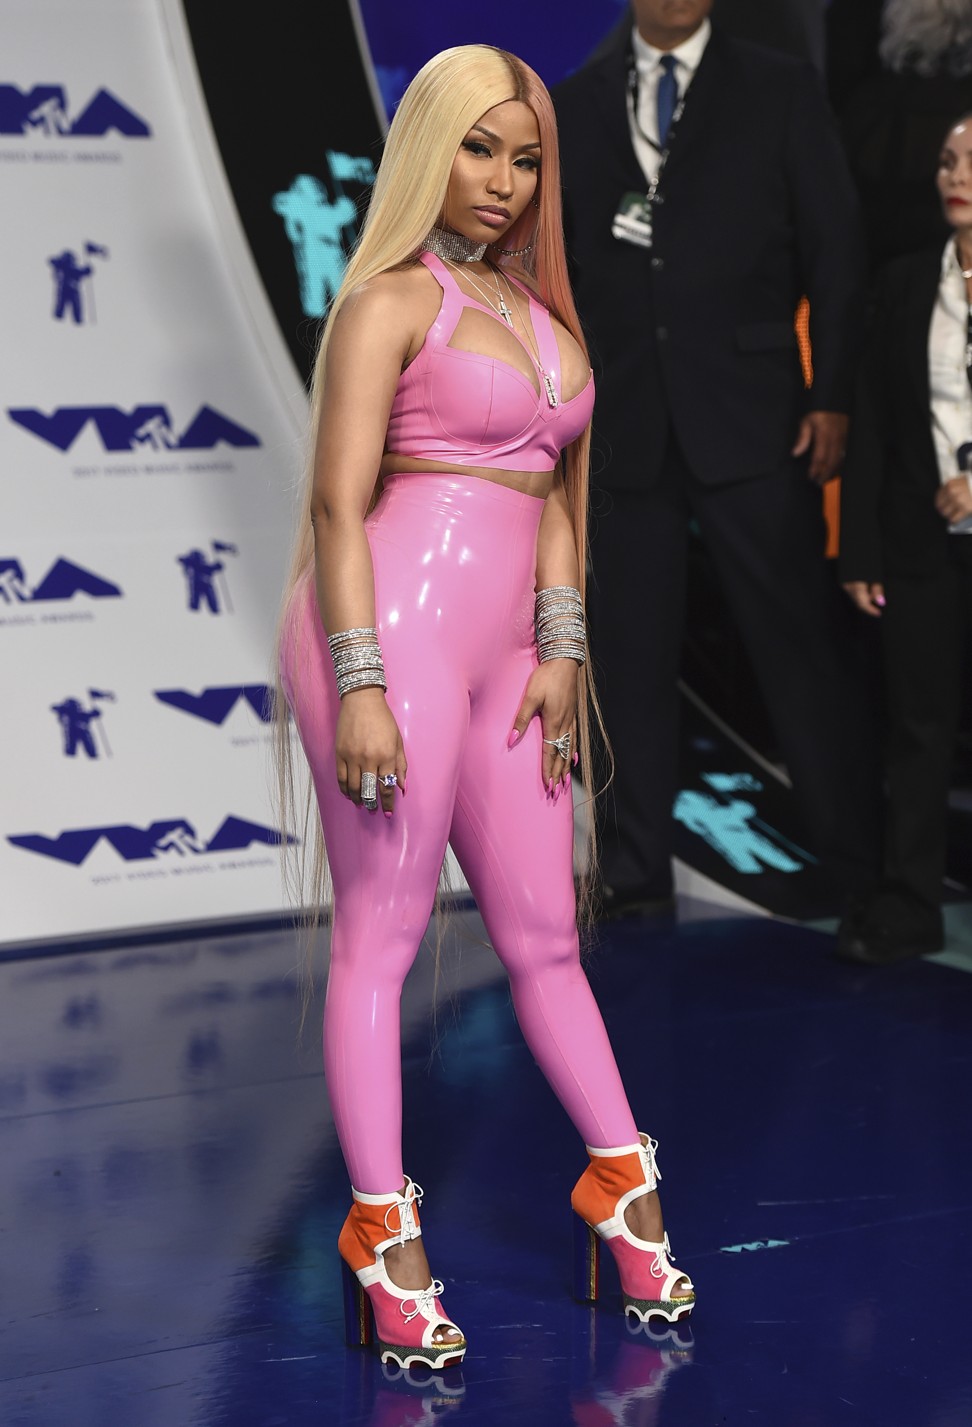 Rapper Nicki Minaj, who has announced her retirement from the music industry, has been described as ‘a walking exaggeration, outsize in sound, personality and look’. Photo: AP